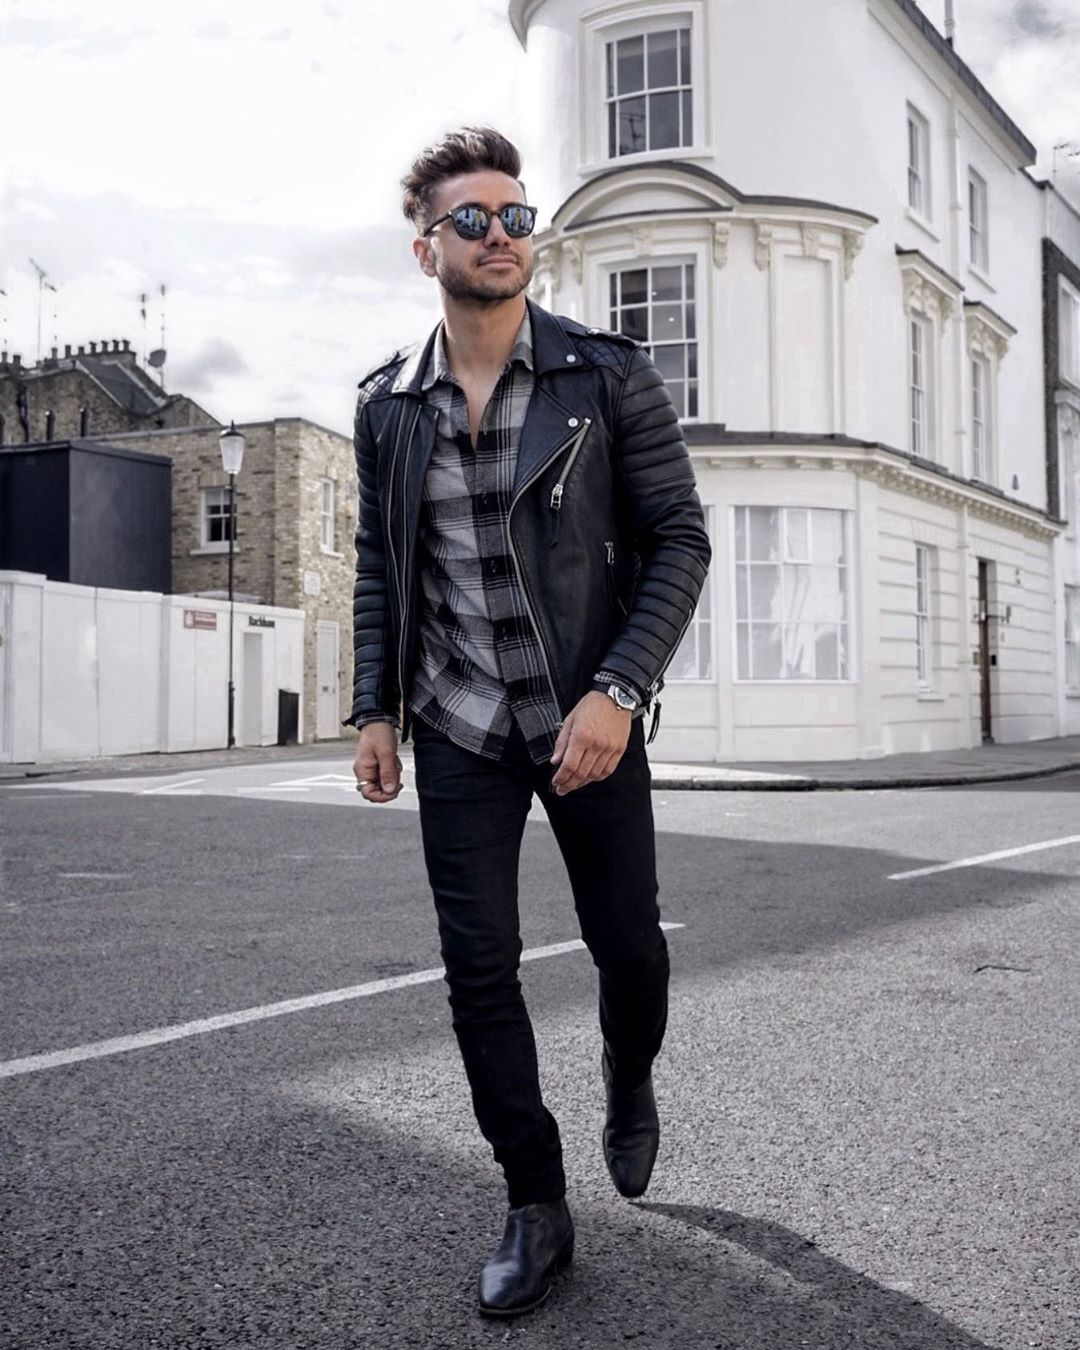 5 Jacket Outfits For Men – LIFESTYLE BY PS